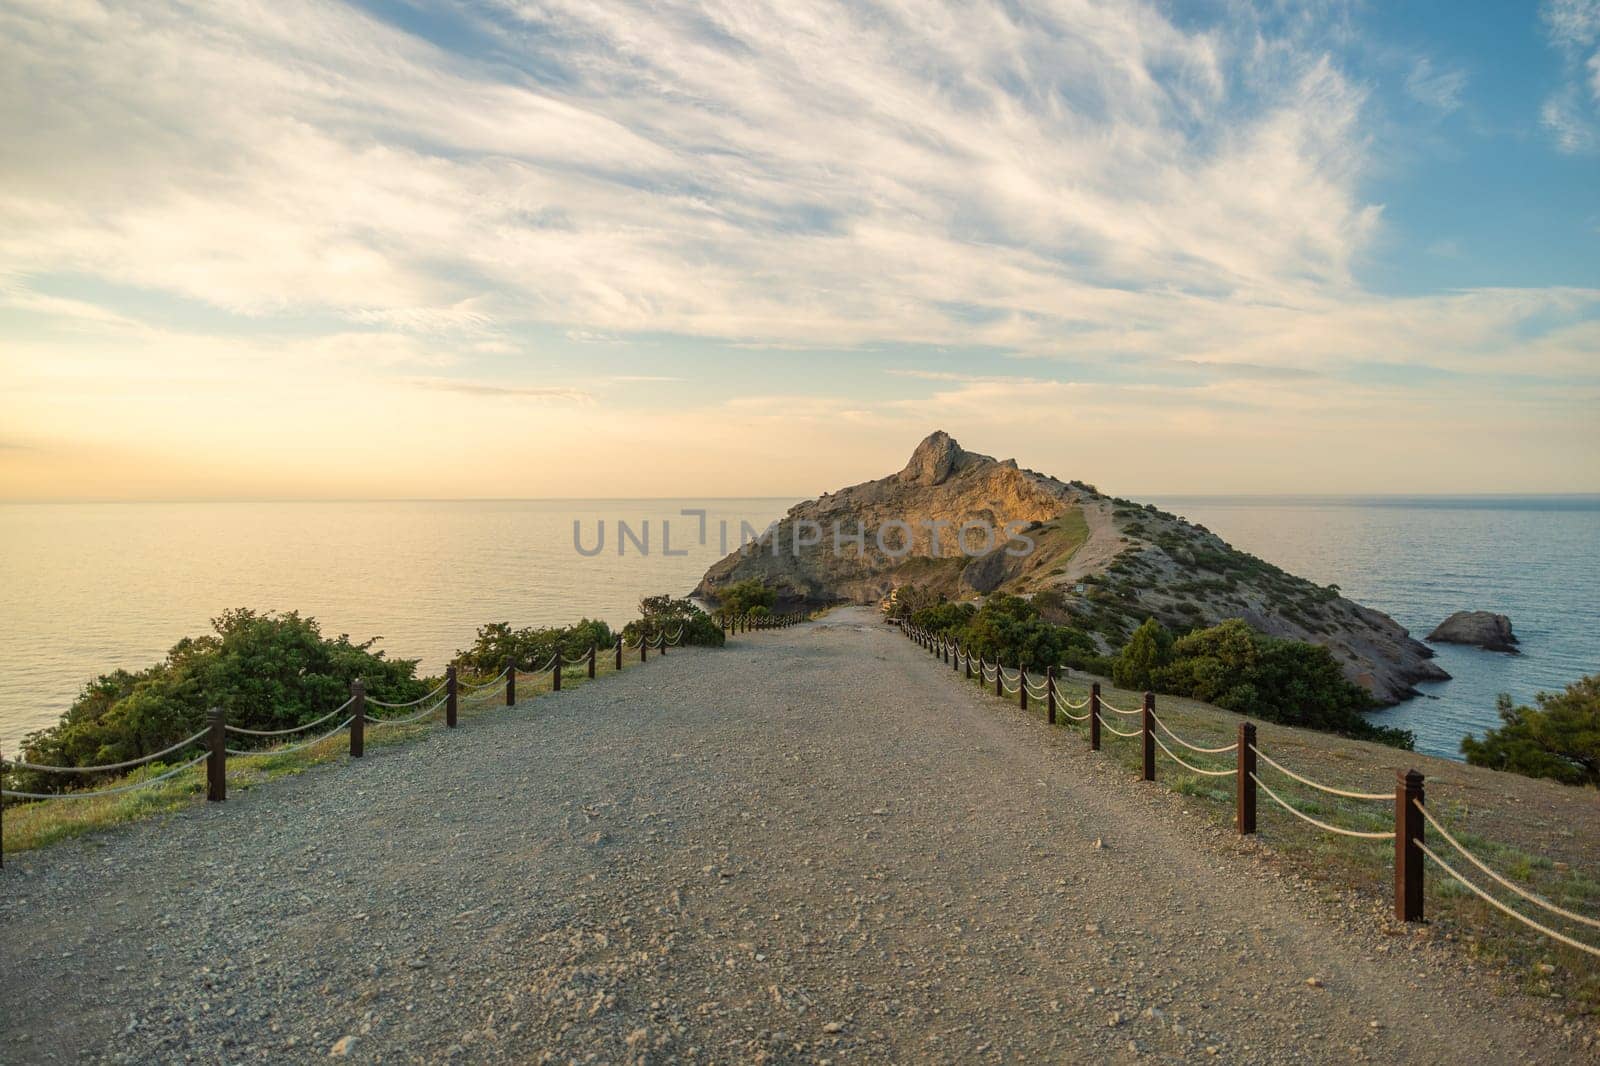 A rocky beach with a long road leading to a cliff. The road is lined with wooden posts and the sky is cloudy